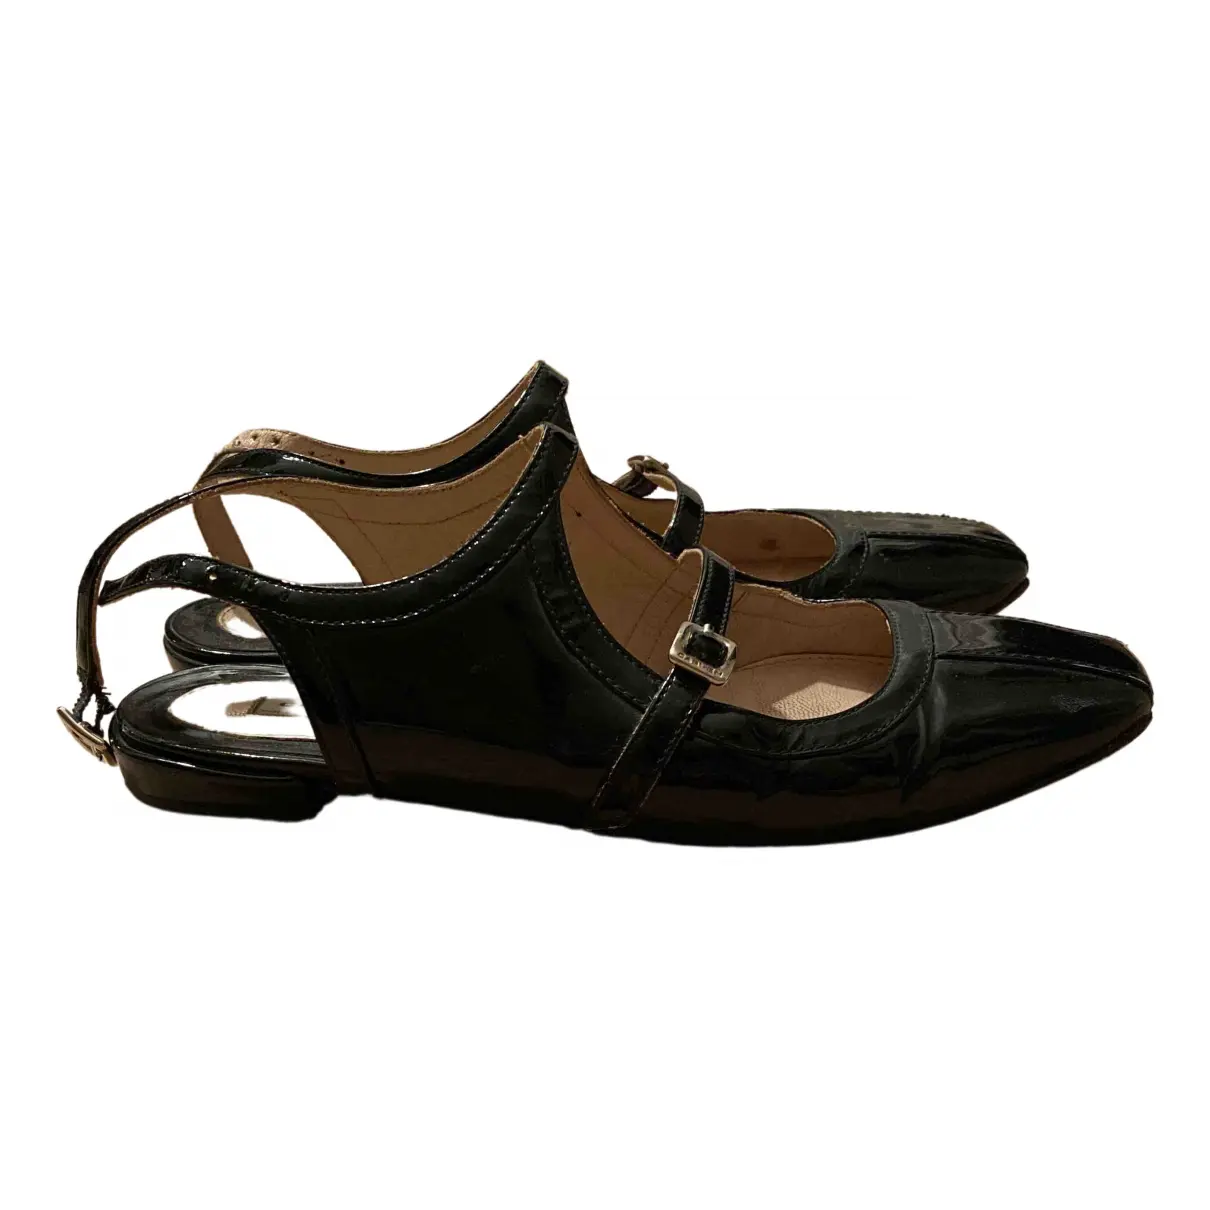 Patent leather sandals Carven